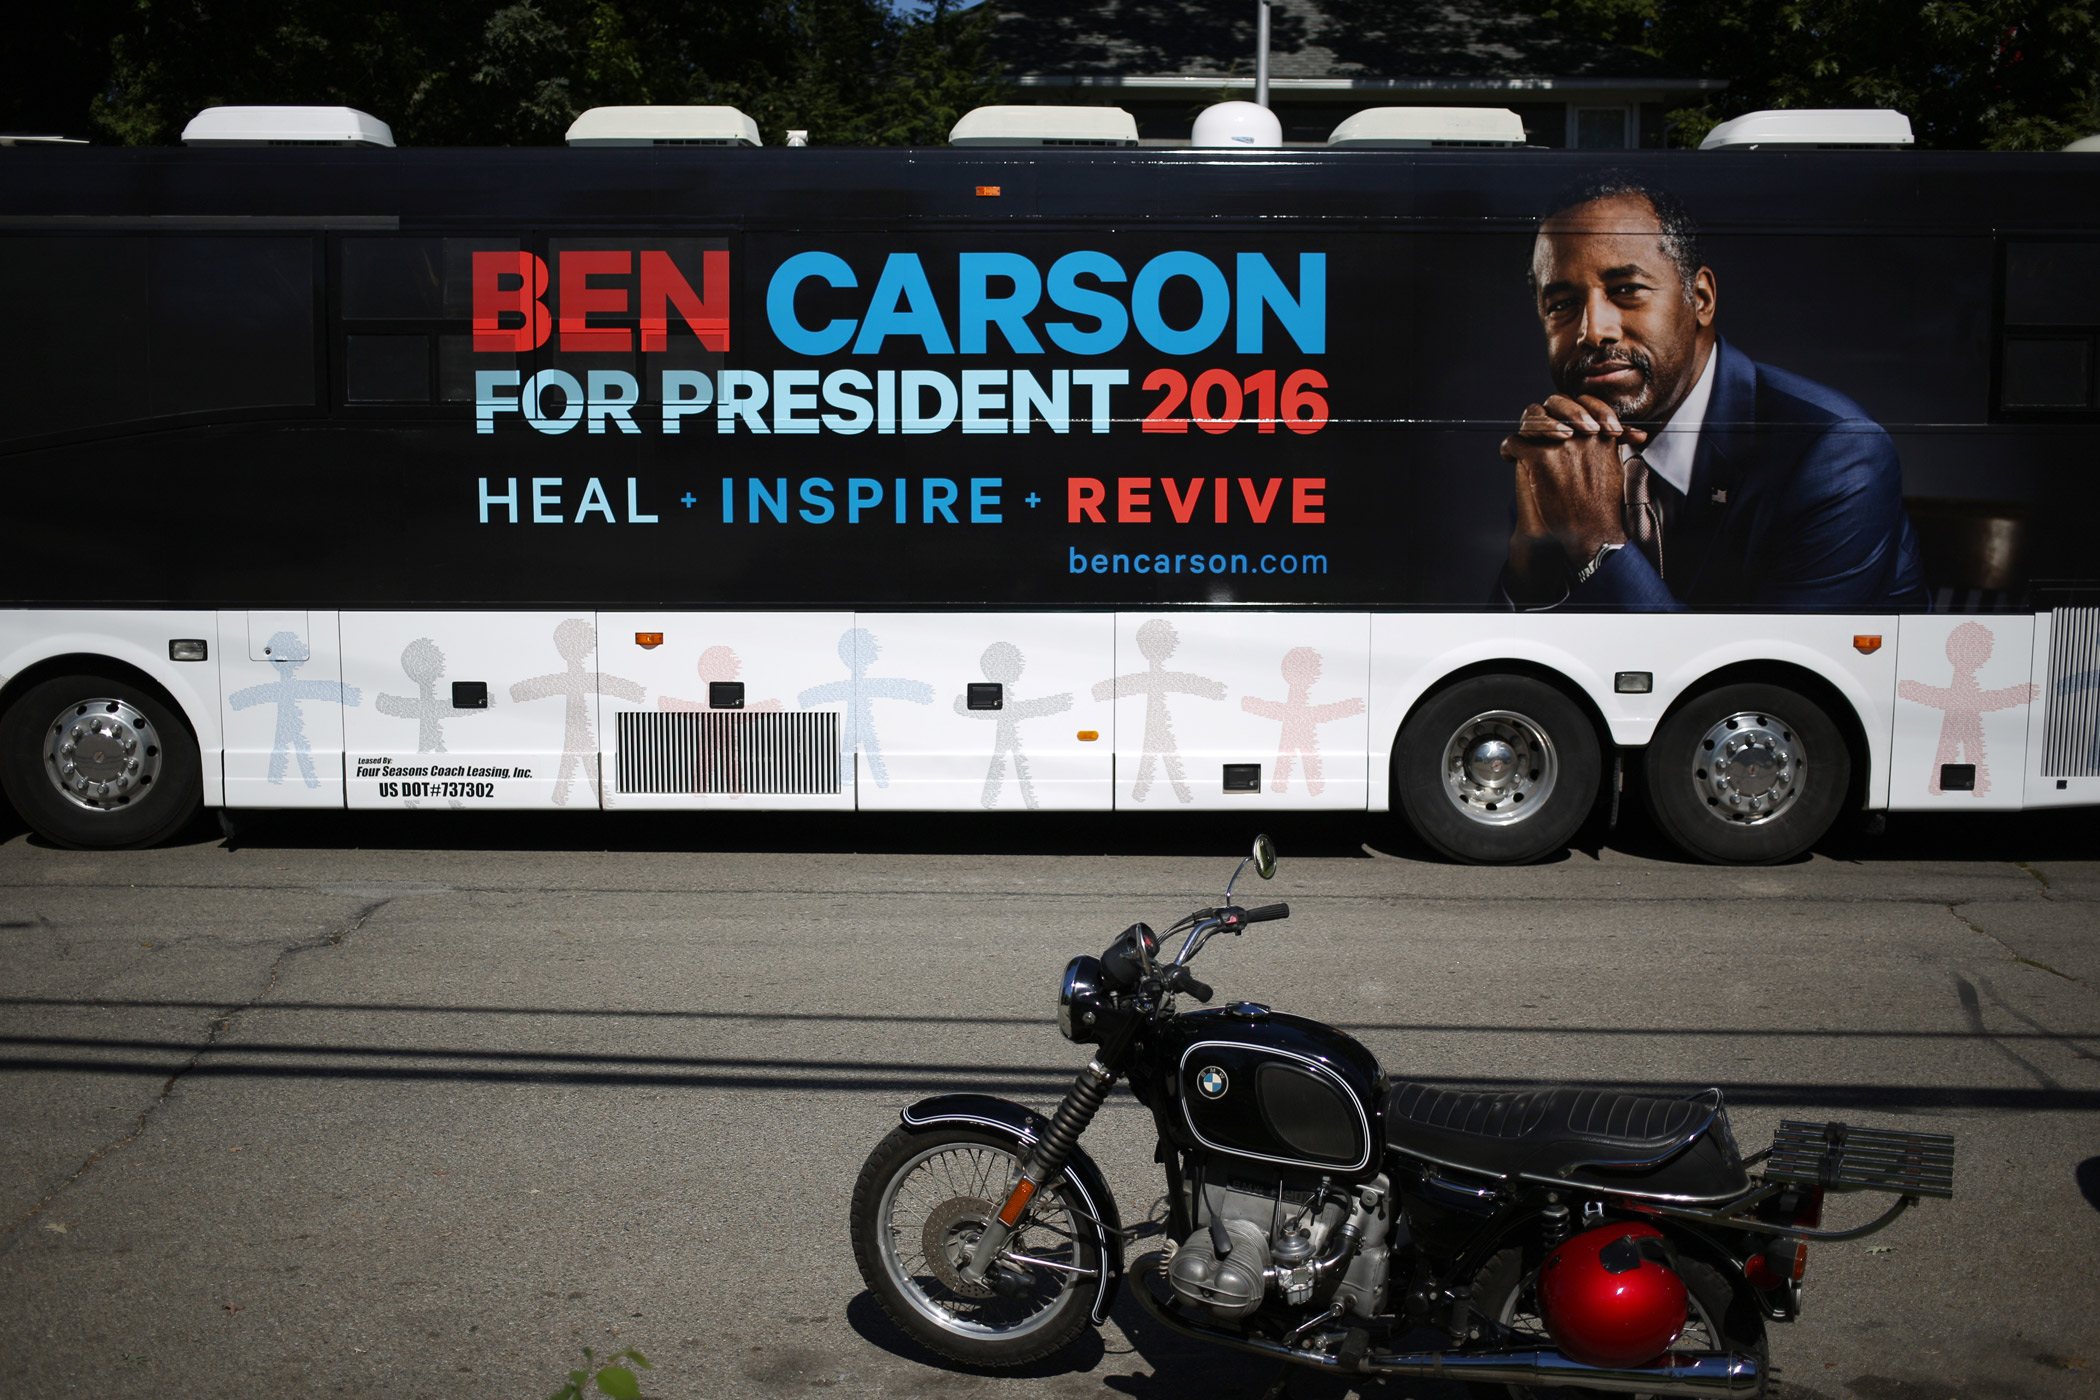 A campaign bus bearing the likeness of presidential candidate Ben Carson is parked near a campaign stop in Jackson, Mich. on Sept. 23, 2015.